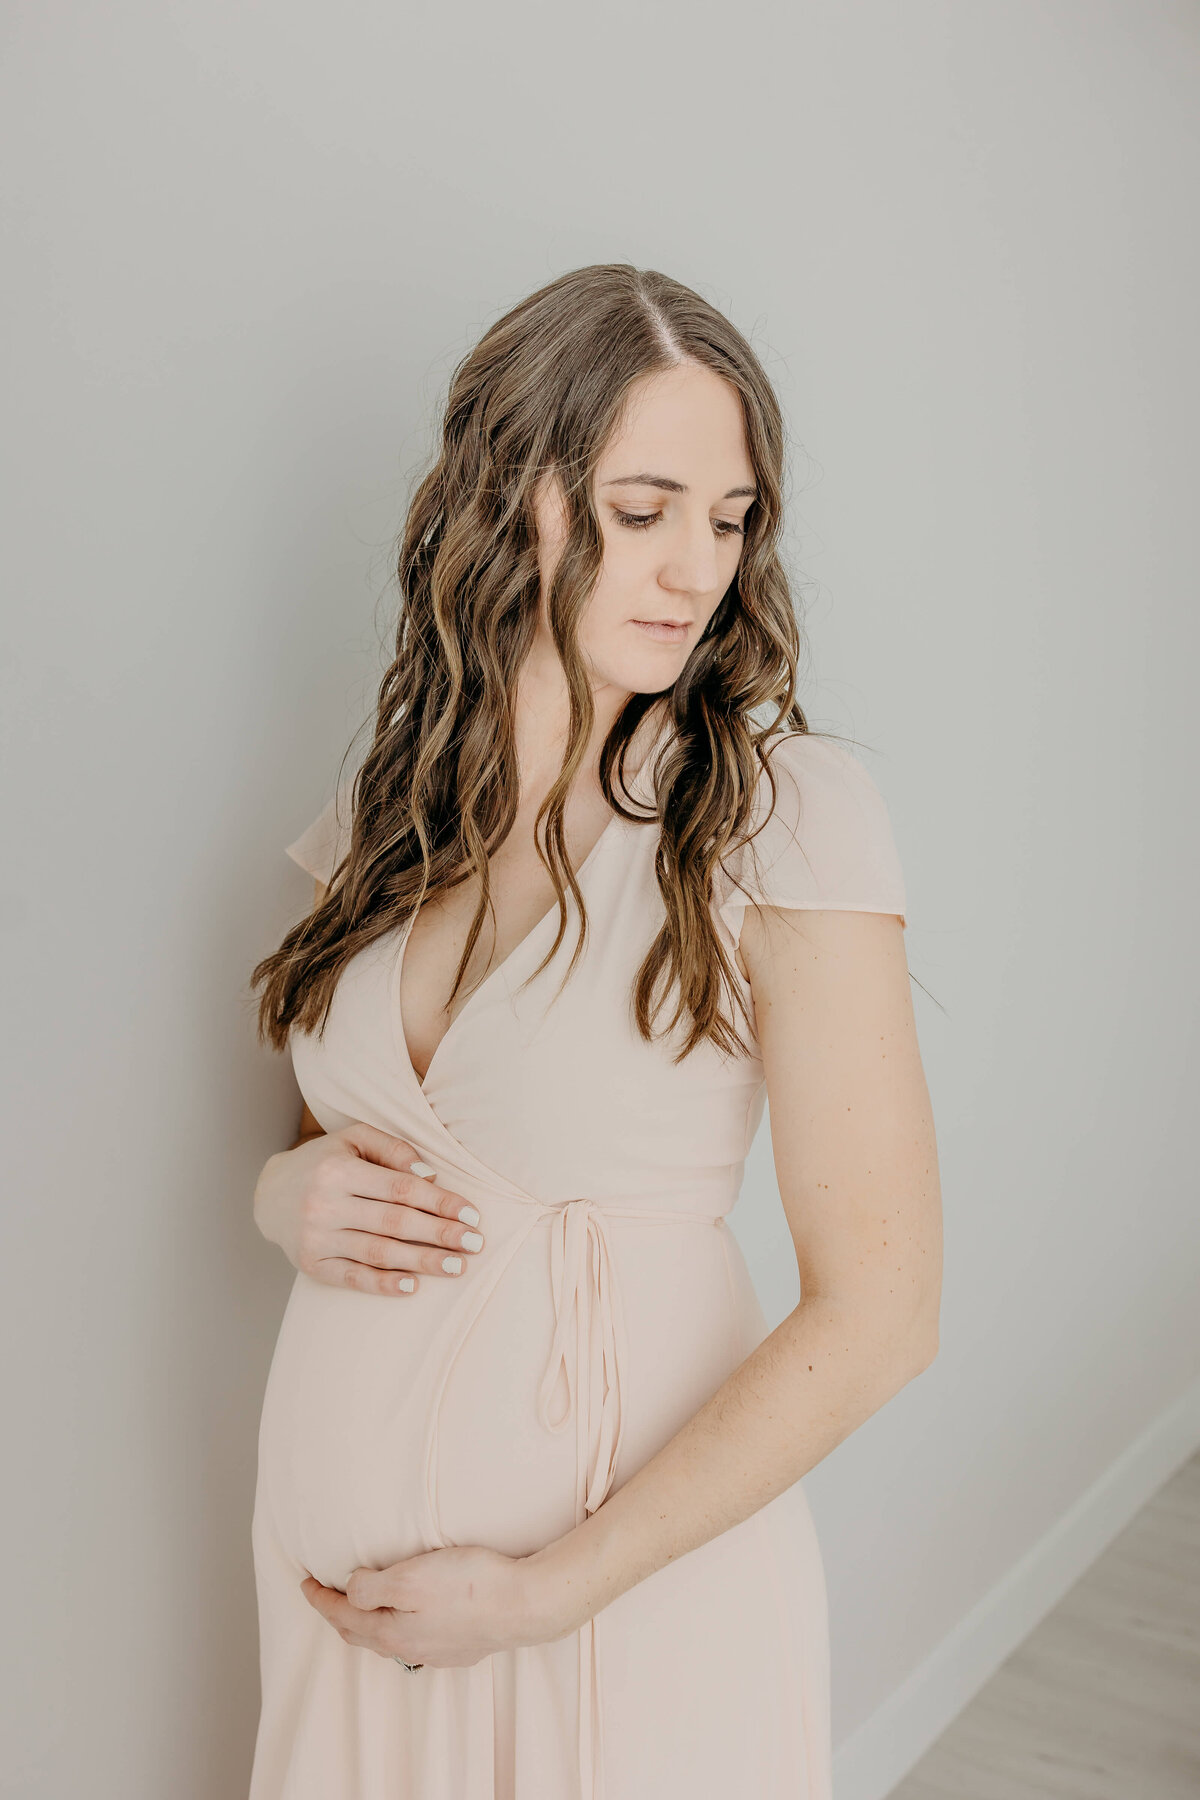 Brunette woman holding pregnant stomach in pink dress